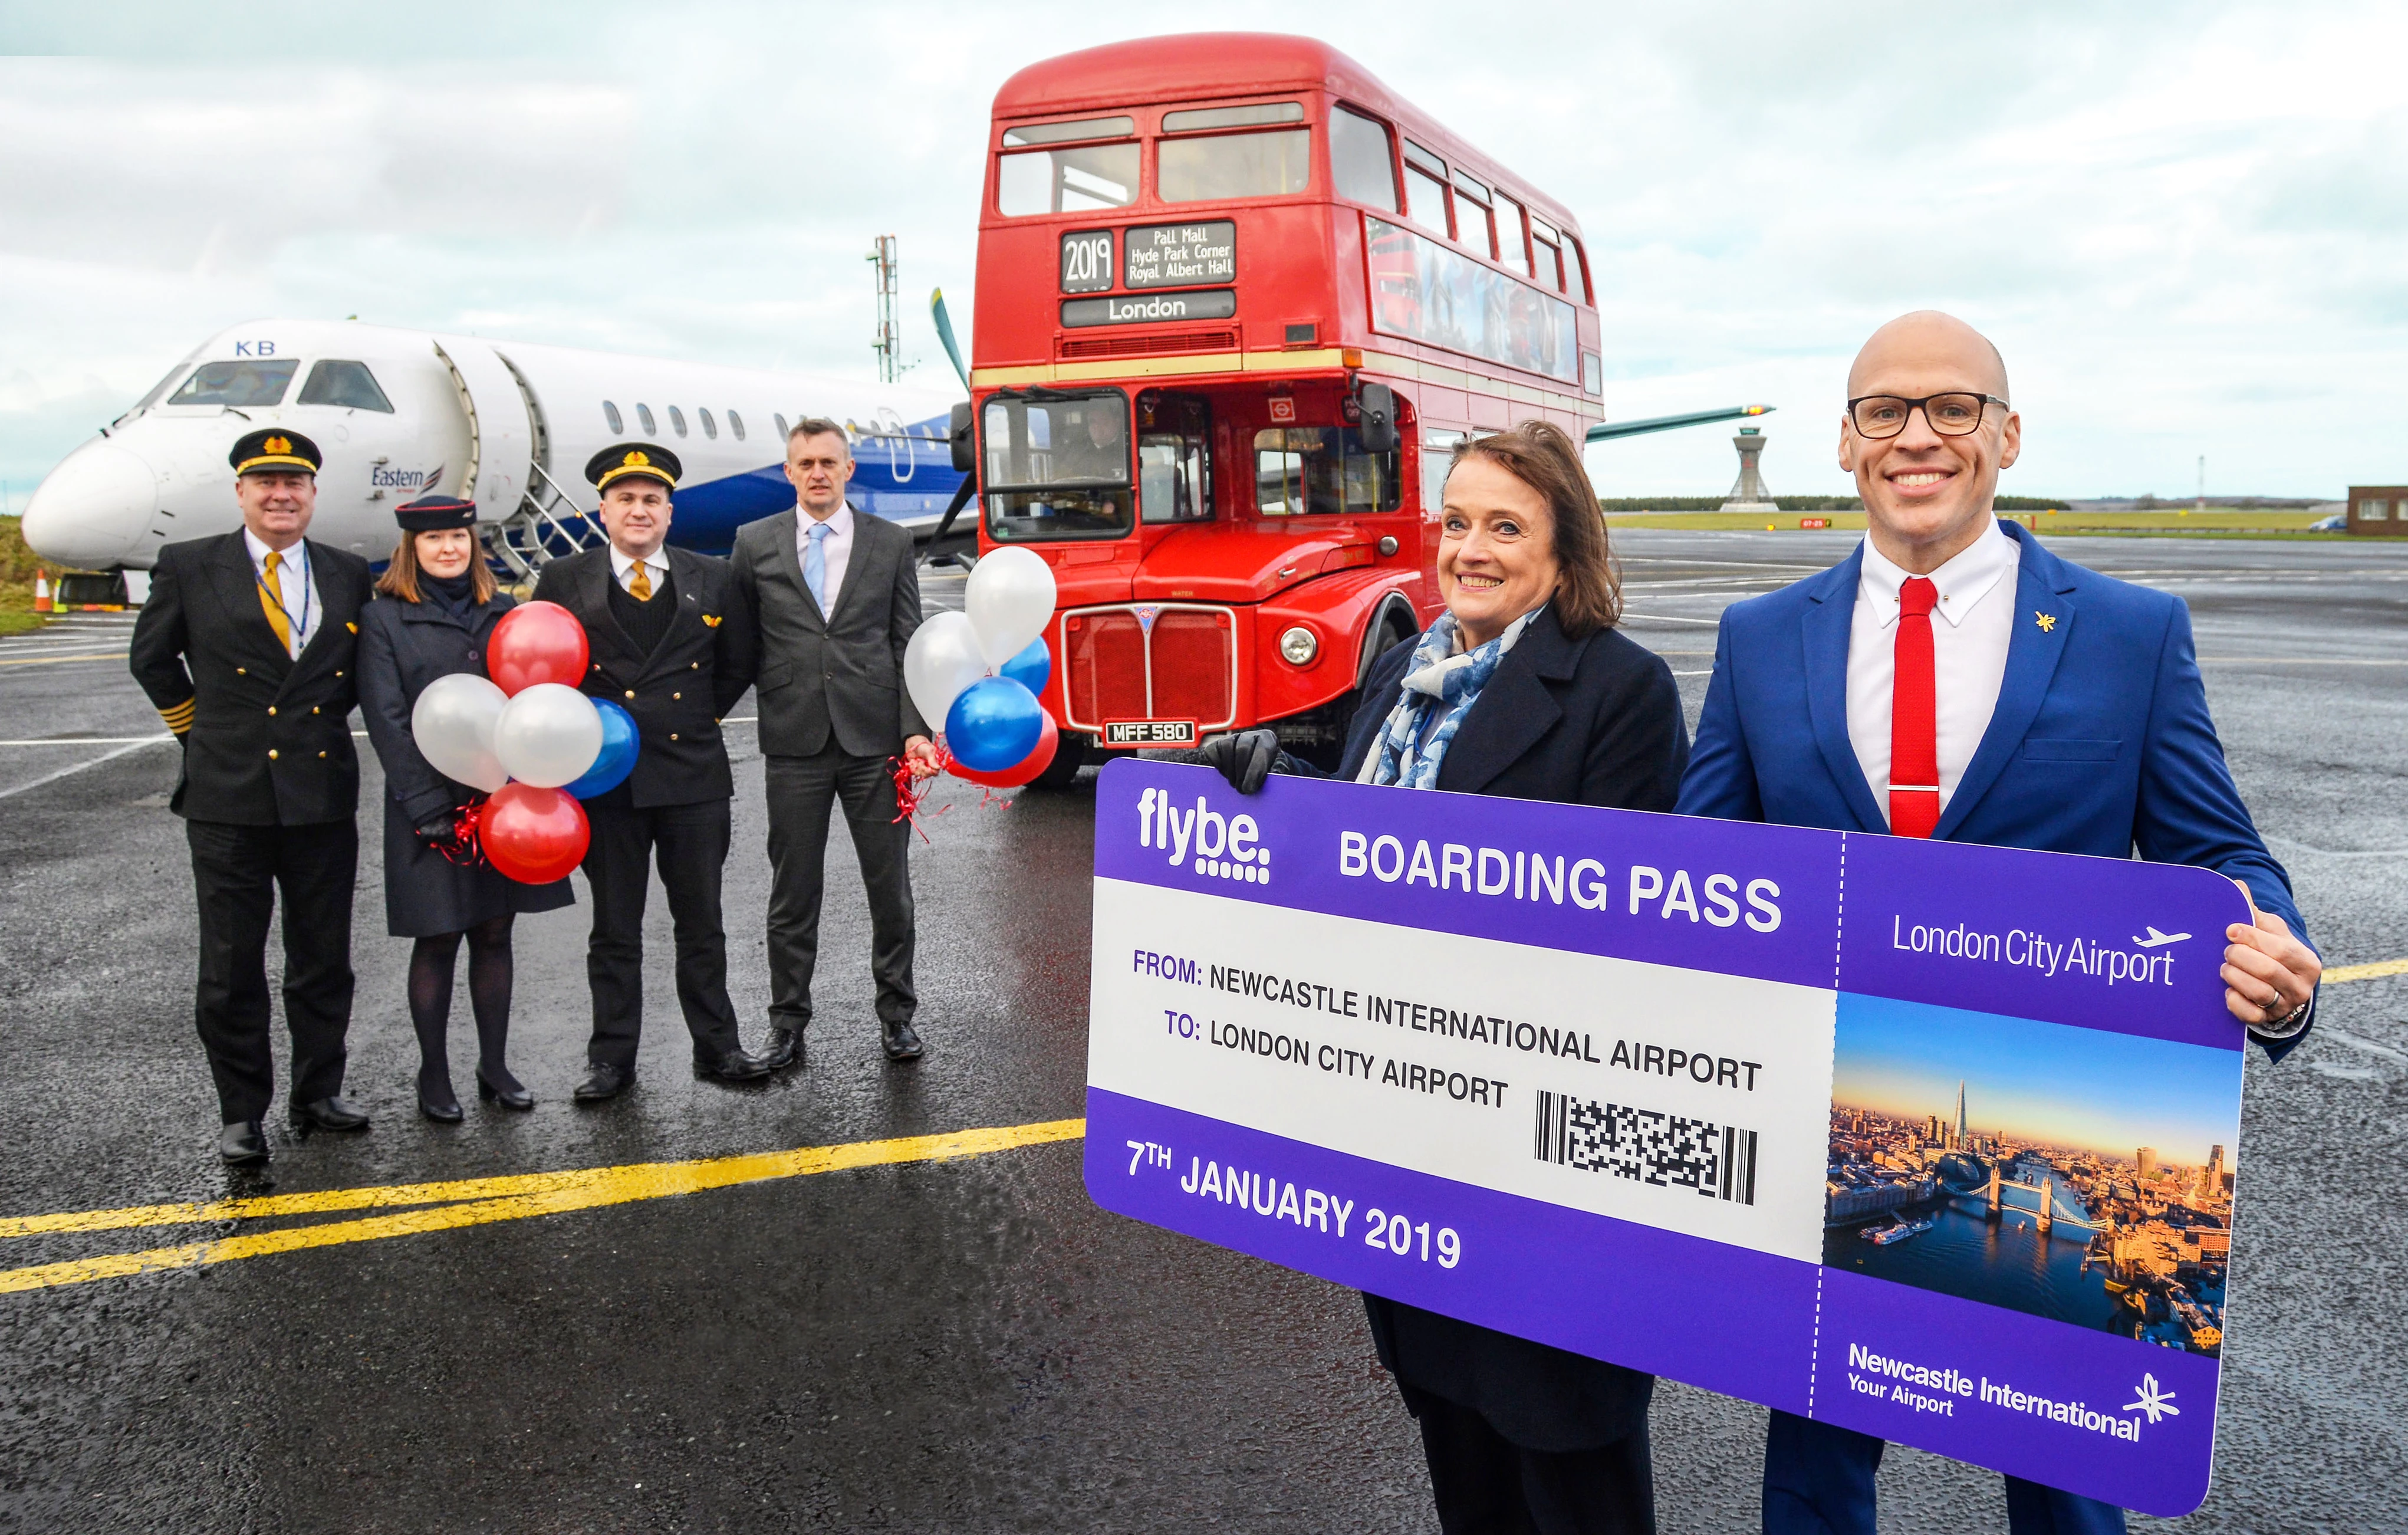 The flights will be operated Flybe’s franchise partner, Eastern Airways